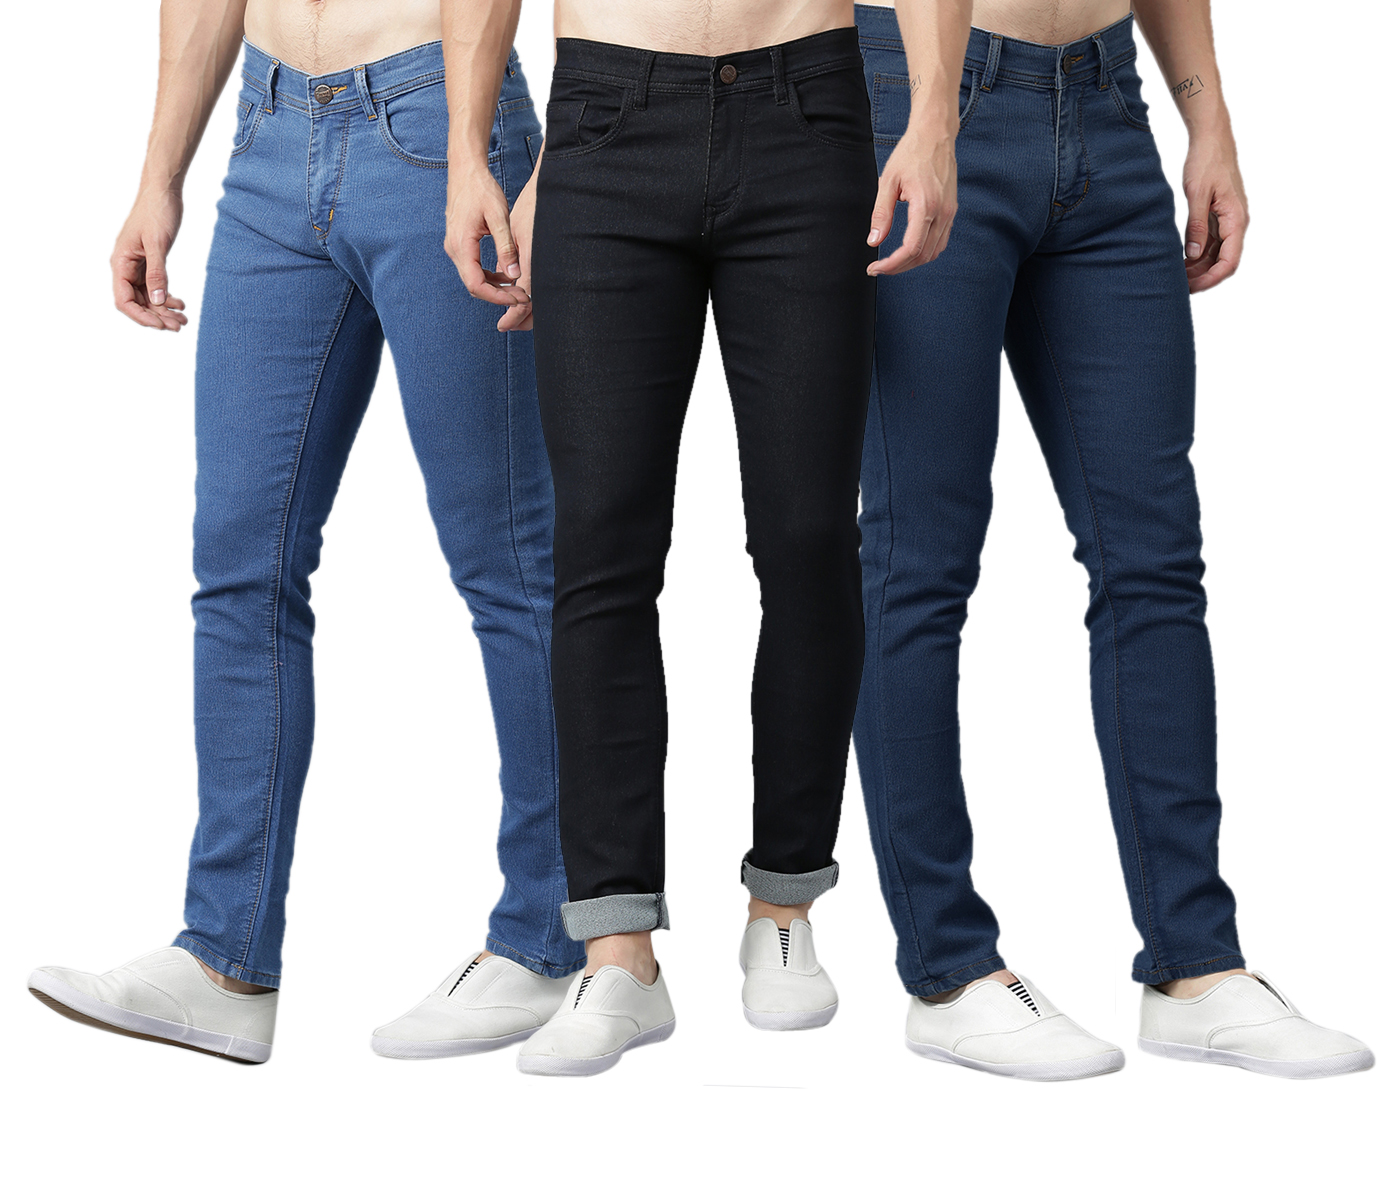 Buy Stylox Combo 3 Stretchable men's Jeans Online @ ₹1499 from ShopClues